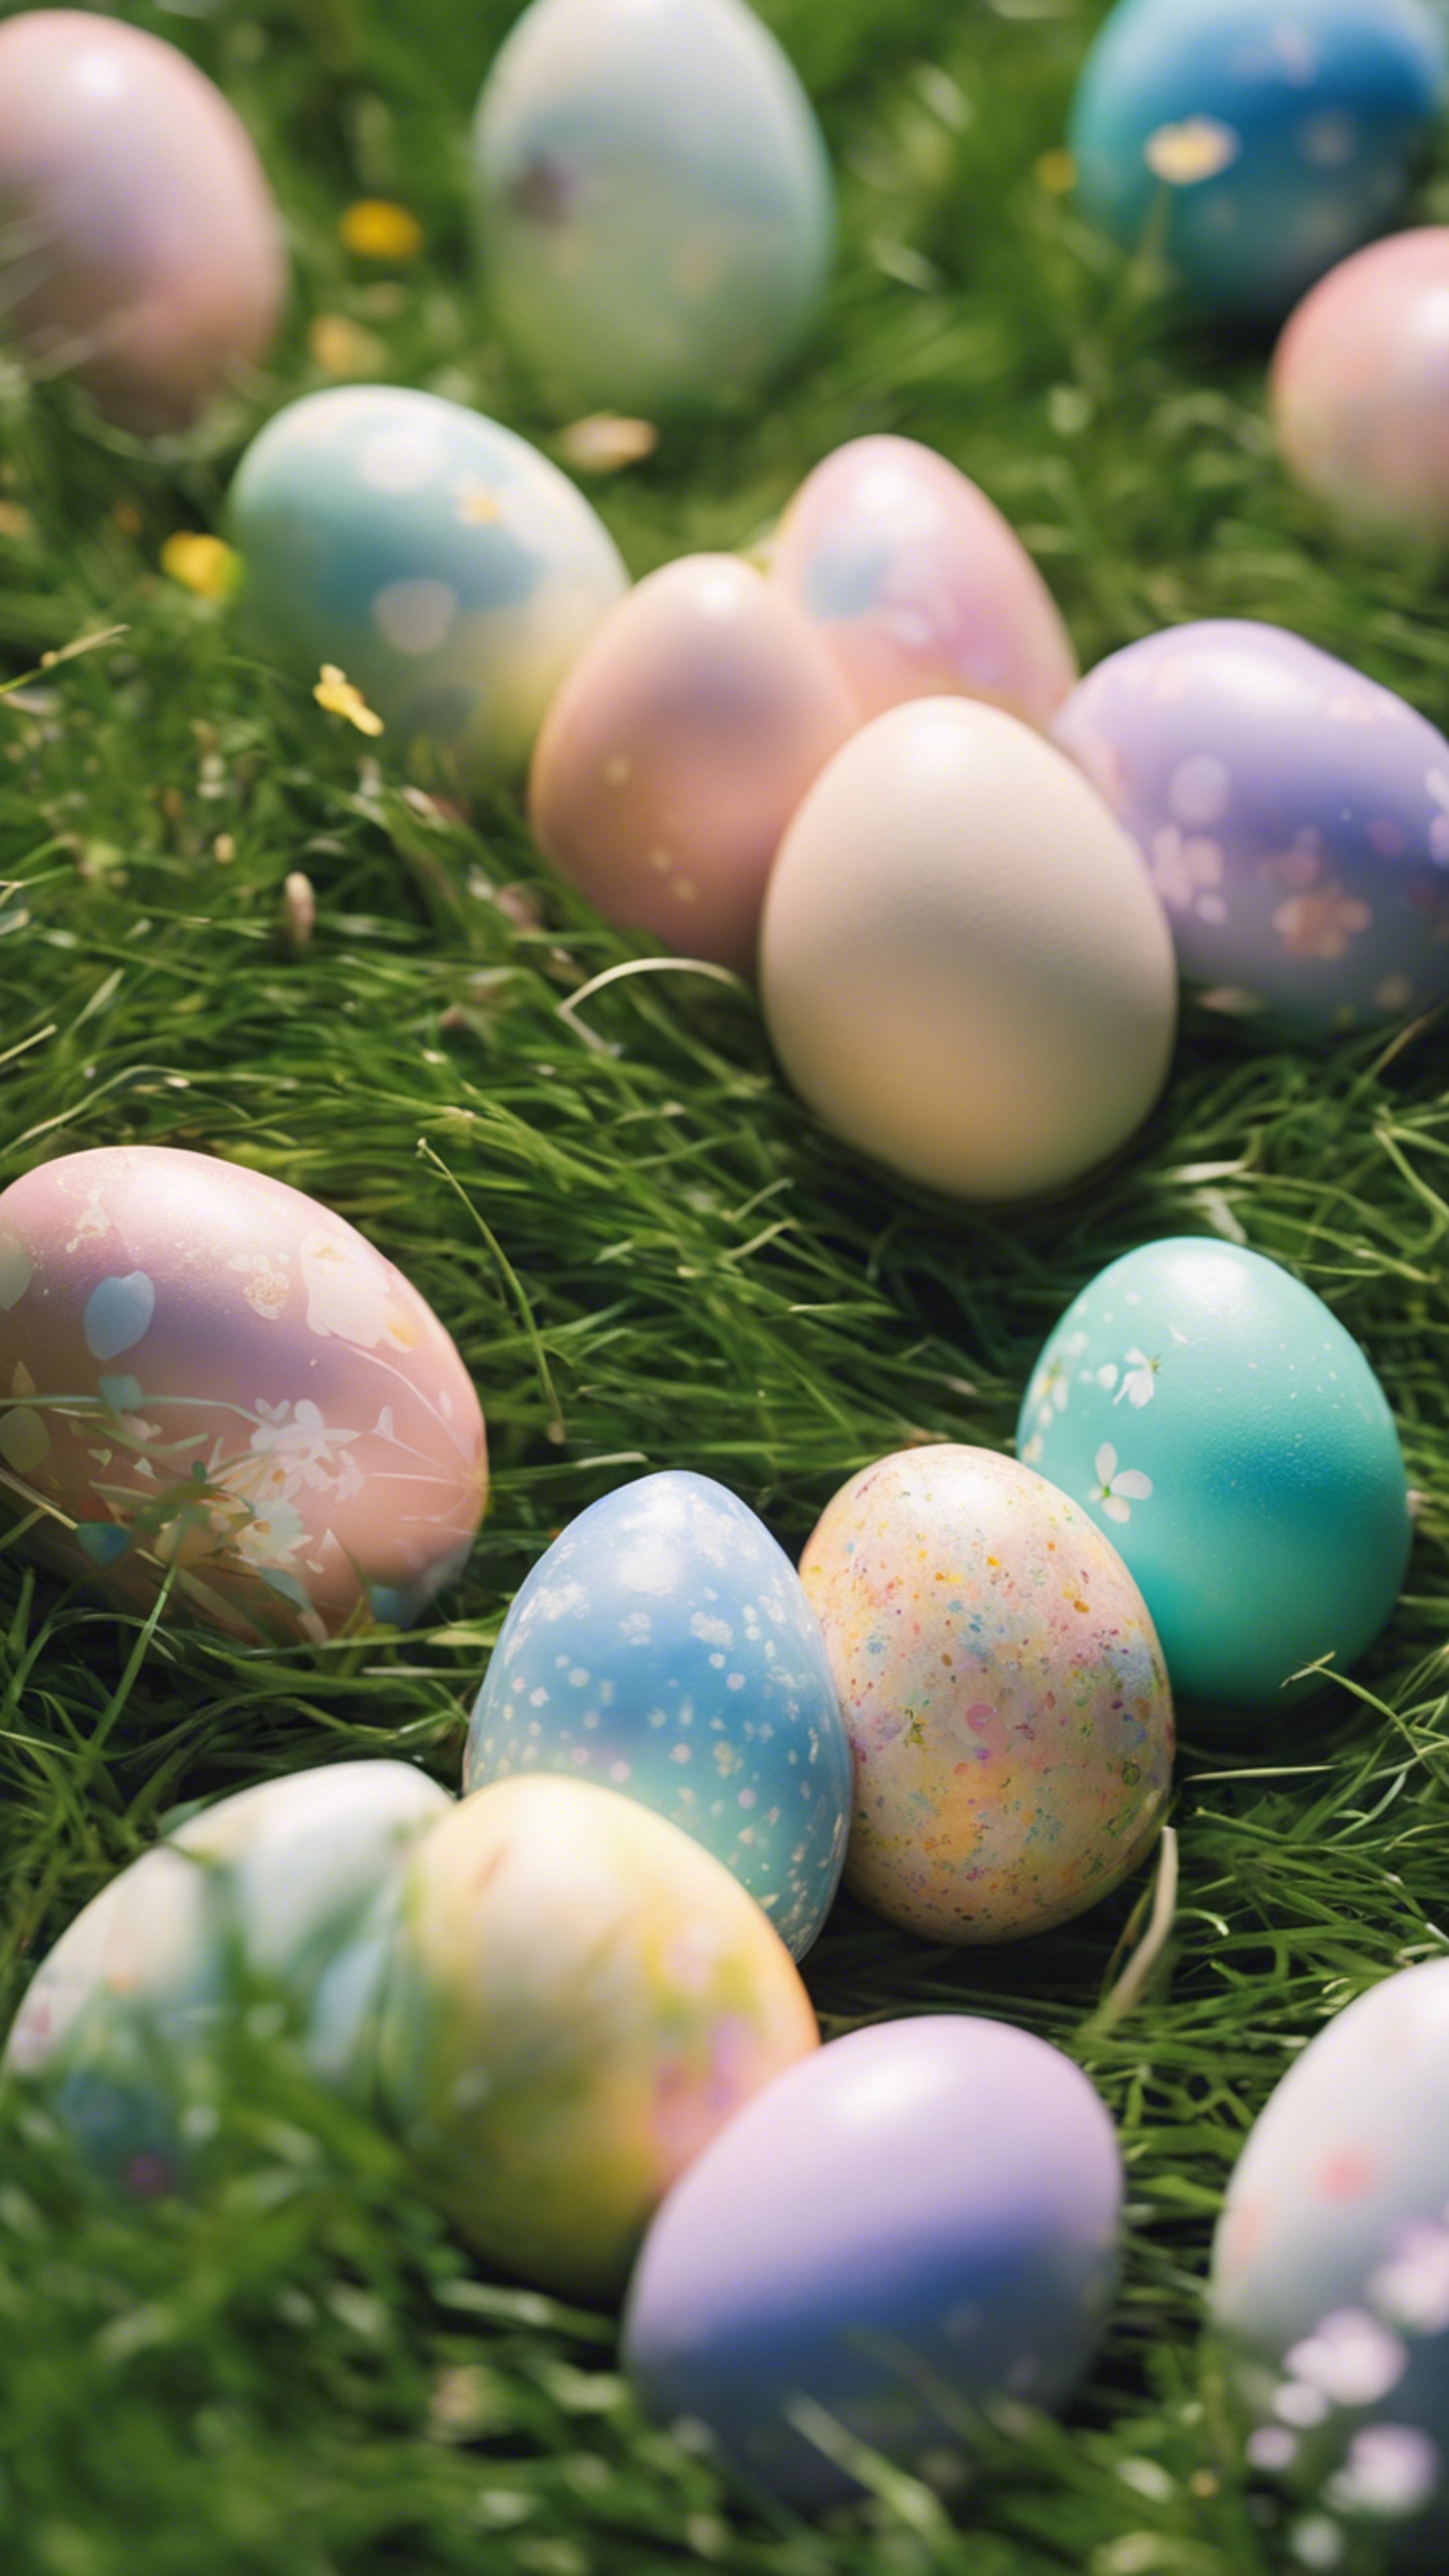 Hand-held prism distorting an image of pastel Easter eggs lined on a grass patch. Wallpaper[c275e60f6e1f4099a863]